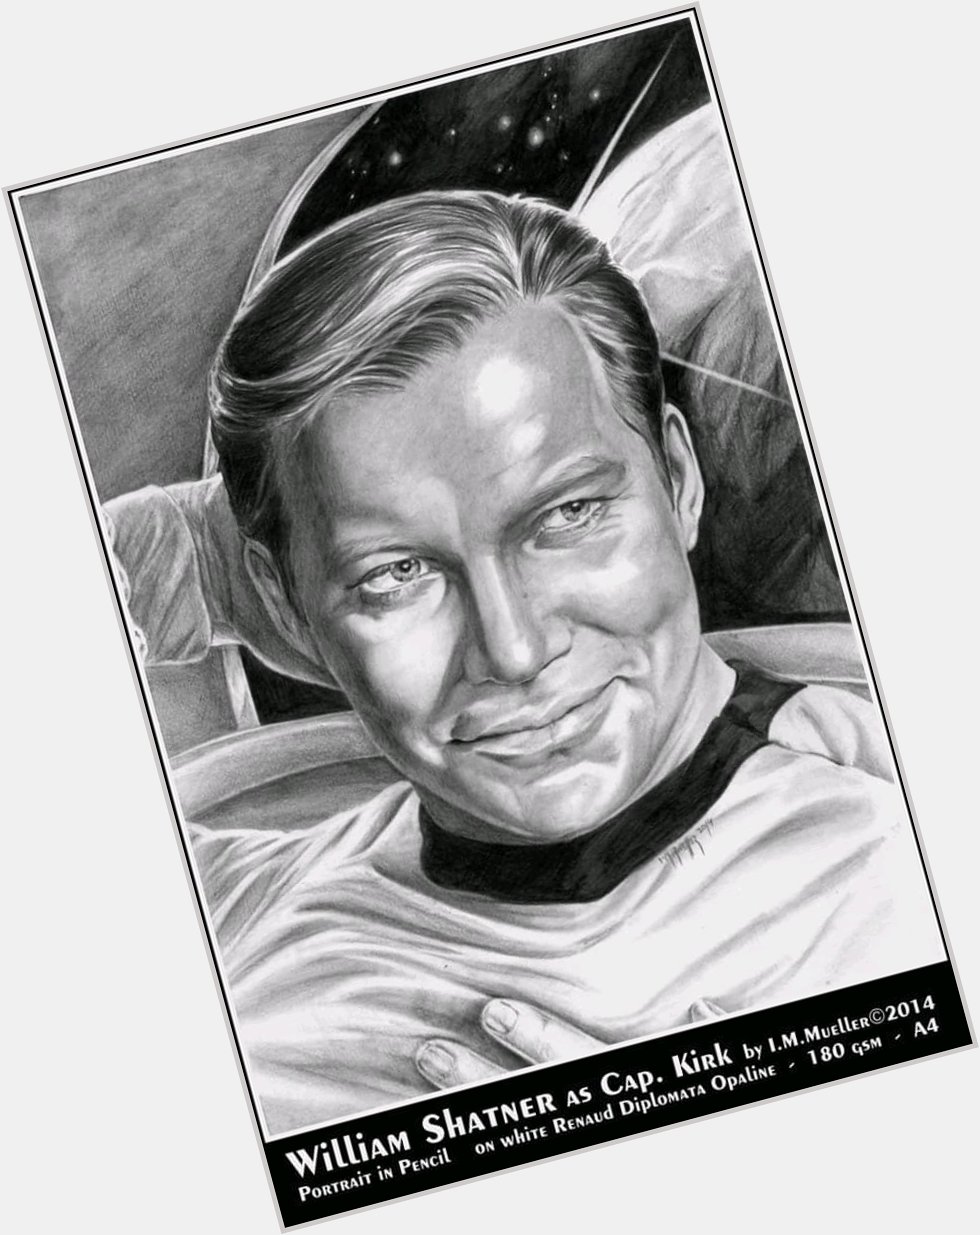 Happy Birthday to William Shatner from a fan. 